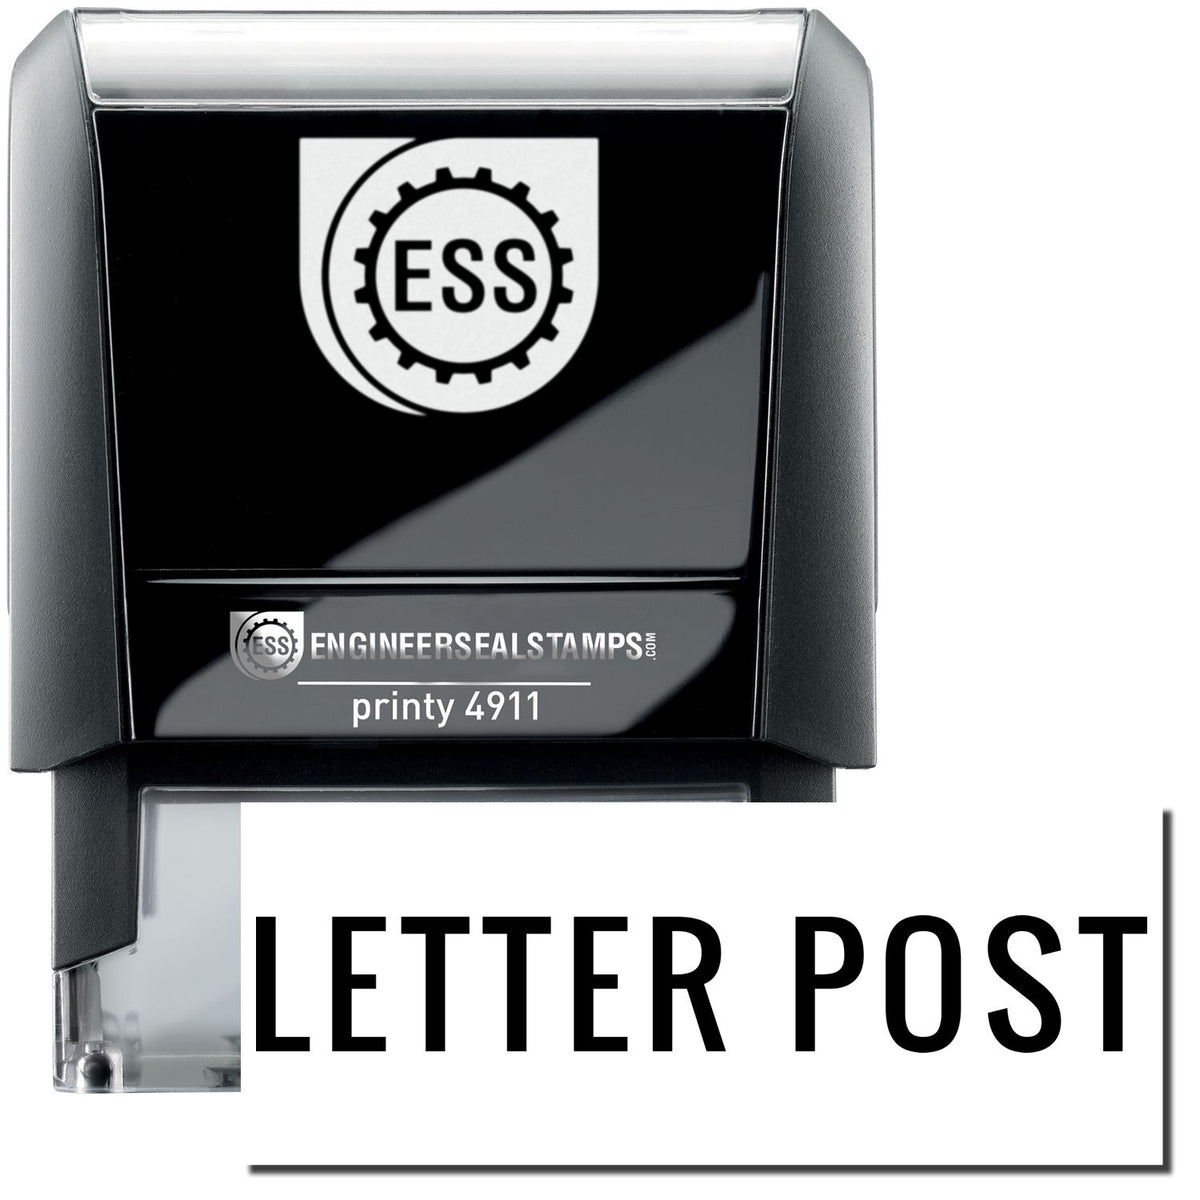 A self-inking stamp with a stamped image showing how the text &quot;LETTER POST&quot; is displayed after stamping.